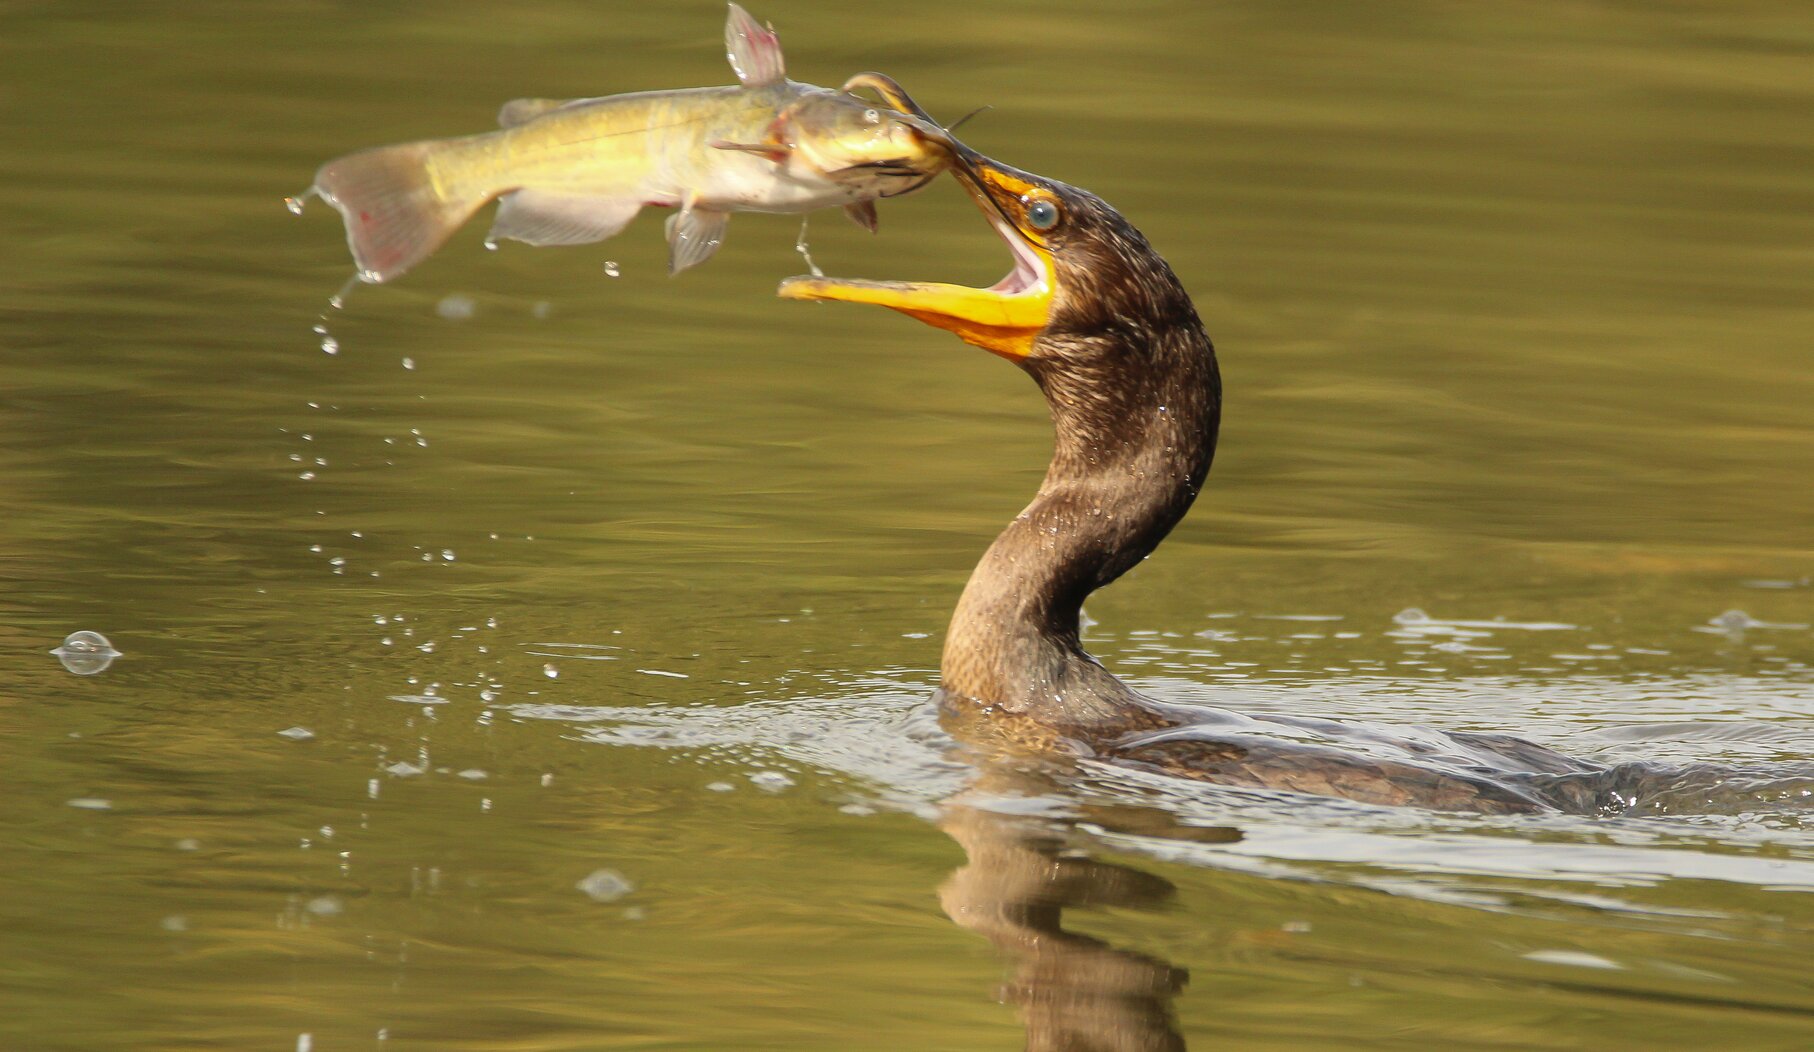 An immature Double-crested Cormorant seems to have developed good fishing skills. Photo: Dave Ostapiuk